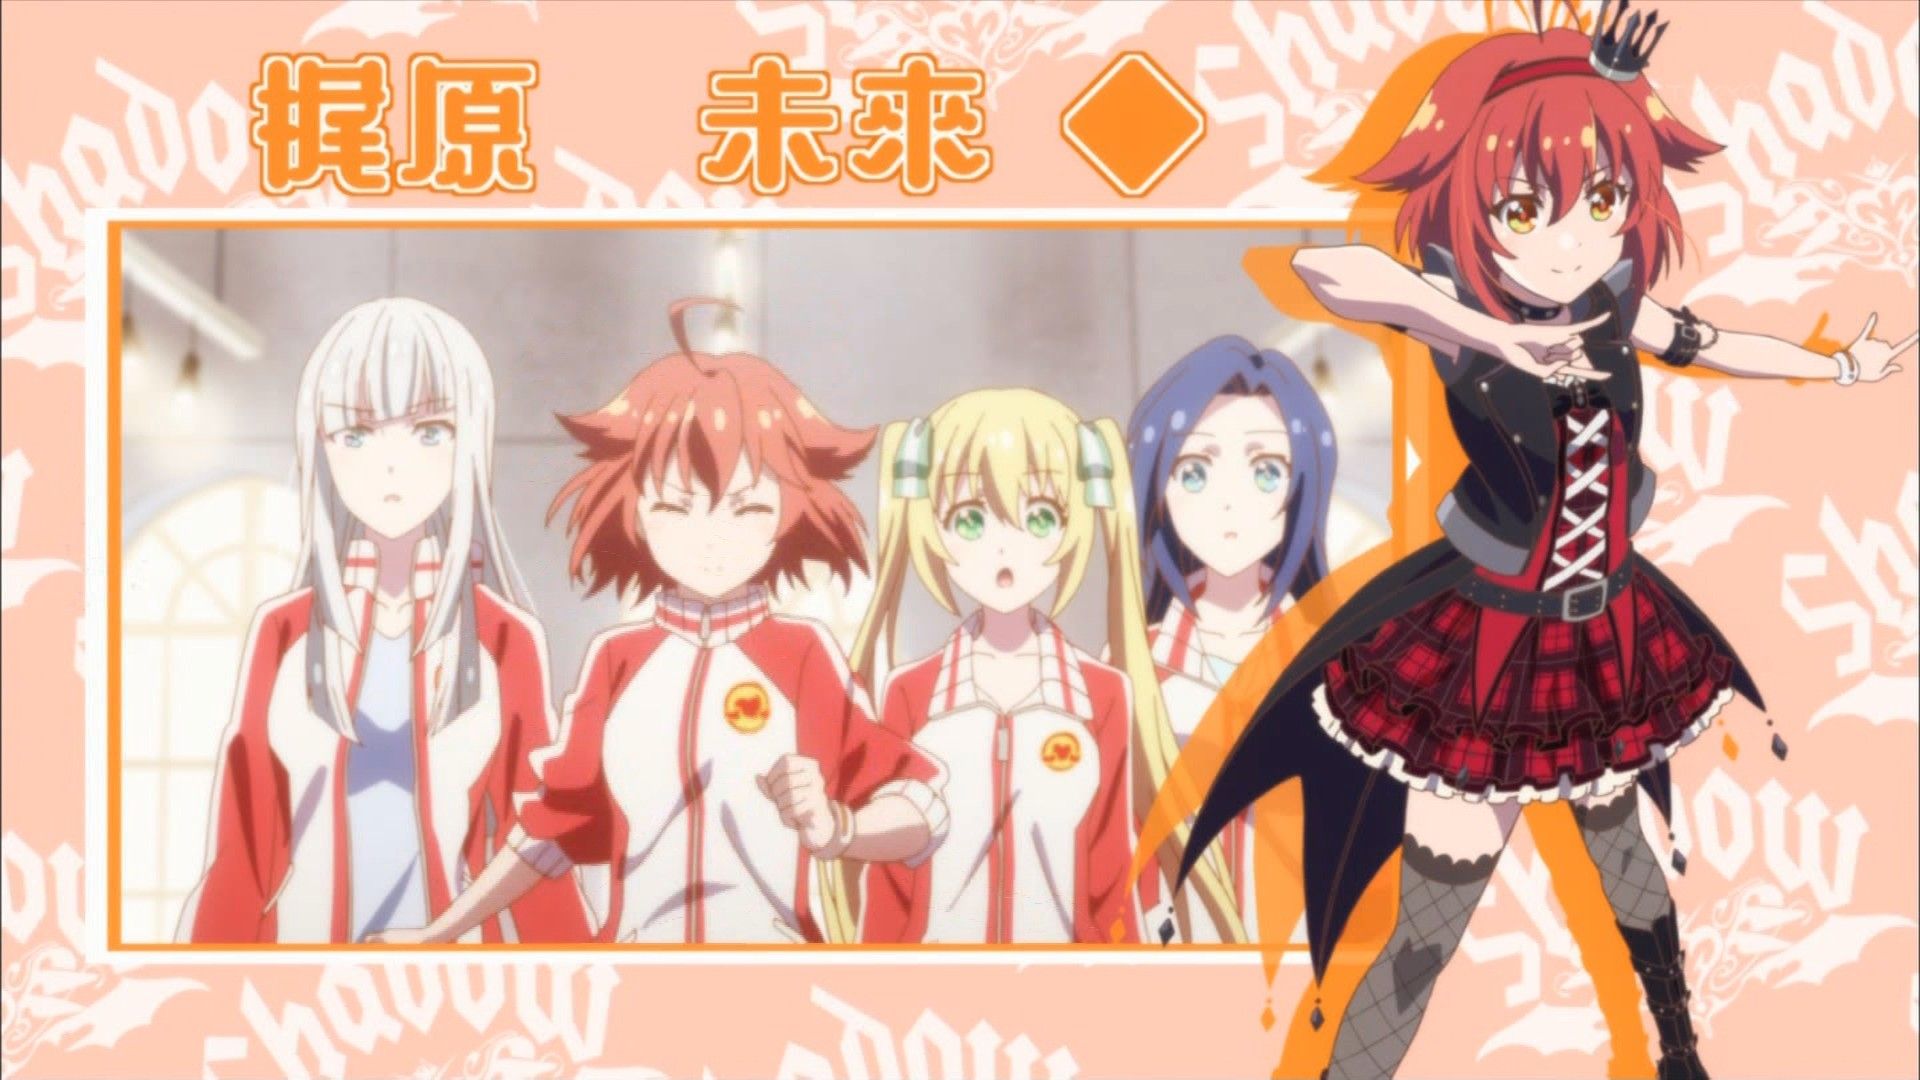 [Autumn anime] "Idol memories' story, suddenly became real part starting www wwwwww 5